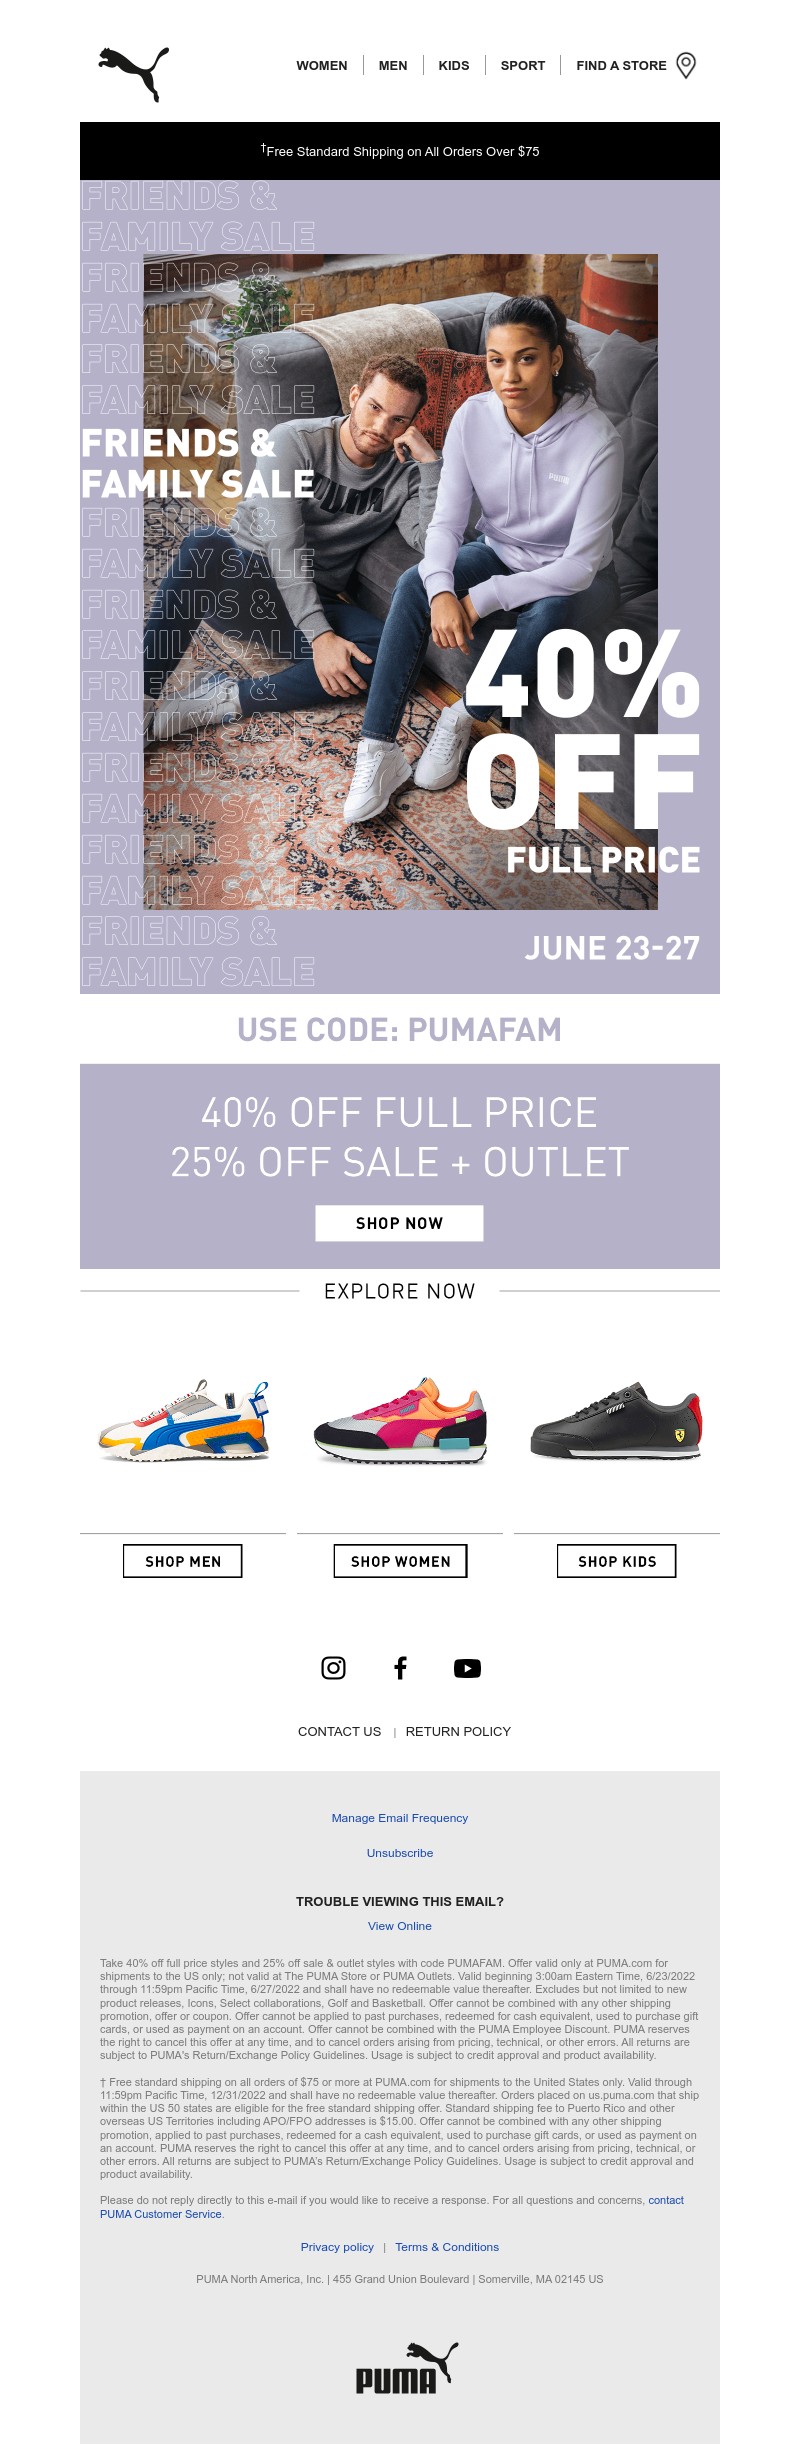 Email sent Puma to a subscriber